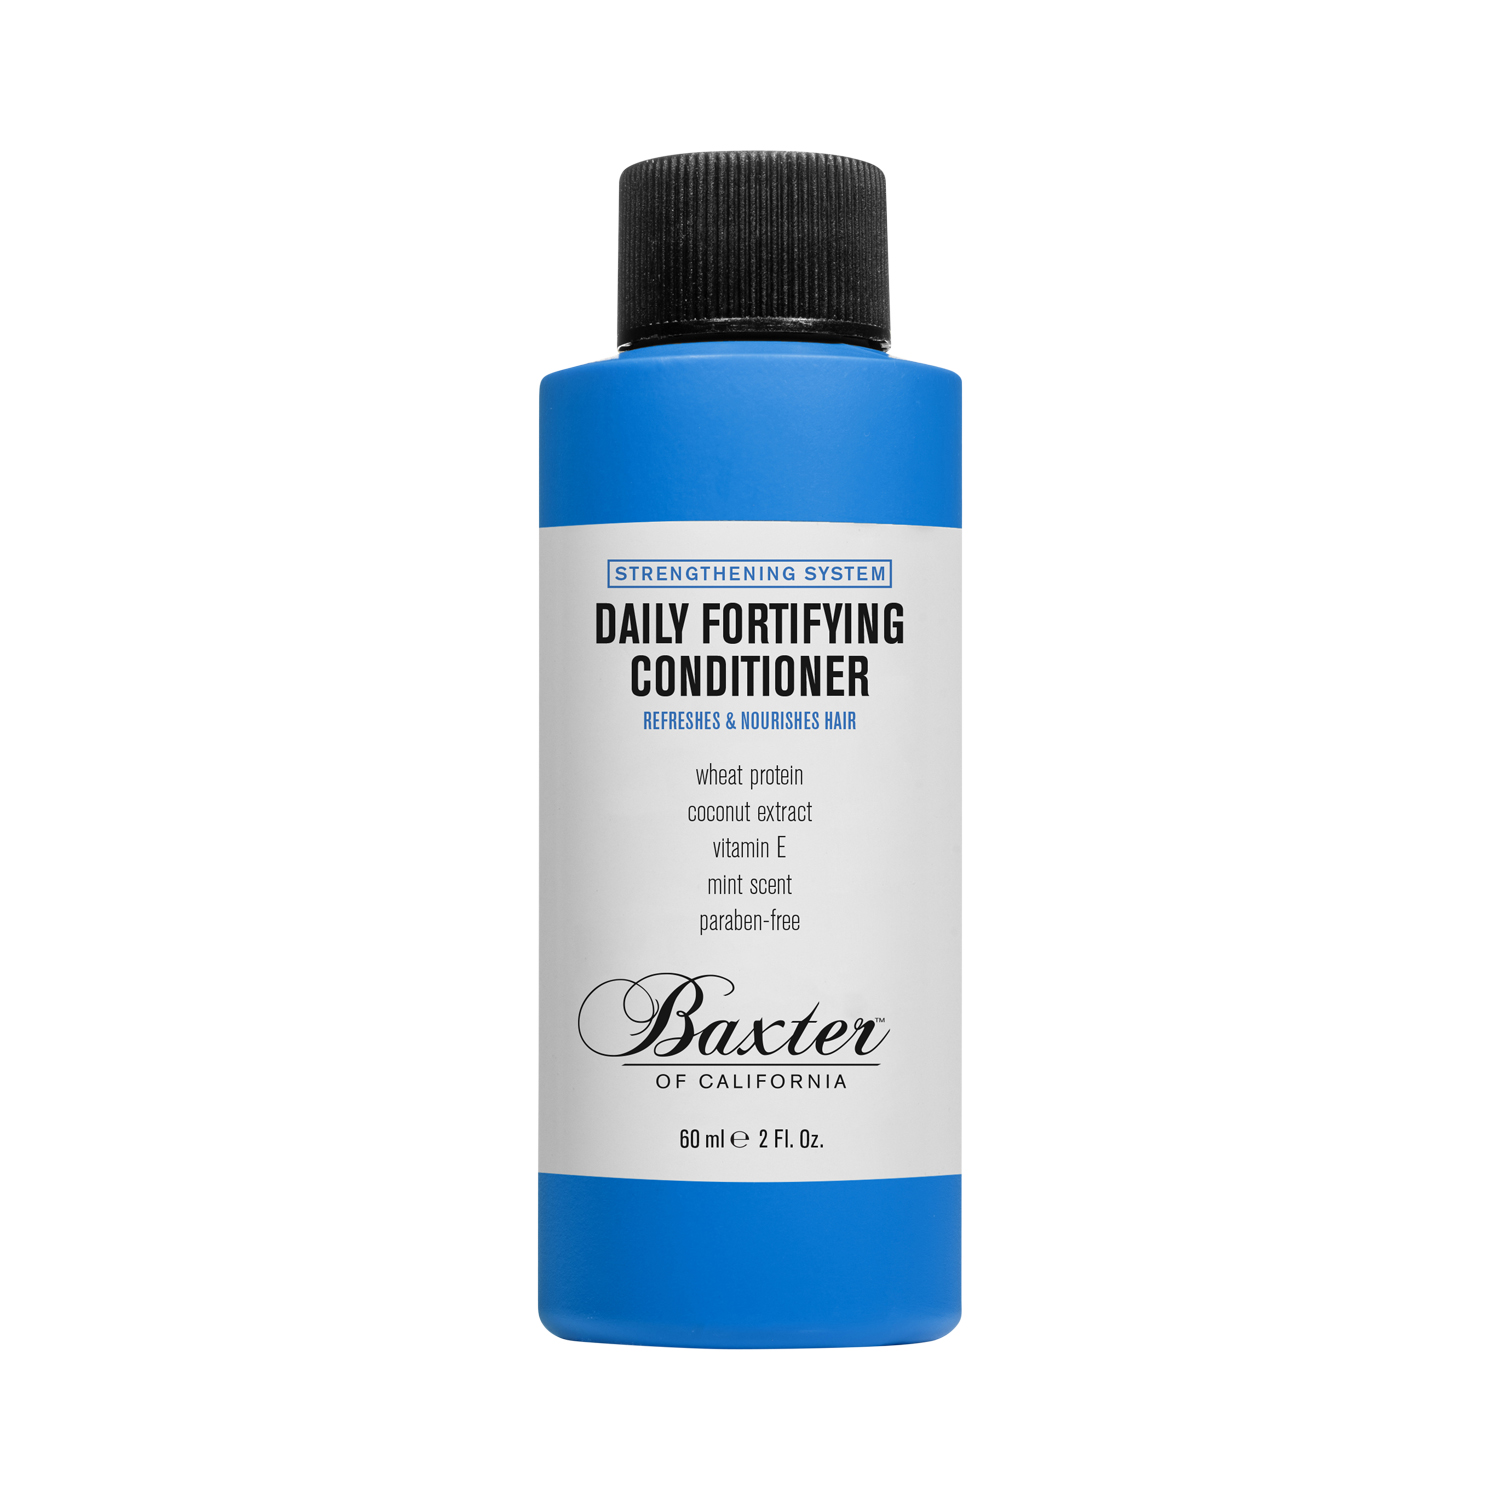 Baxter of California - Daily Fortifying Conditioner